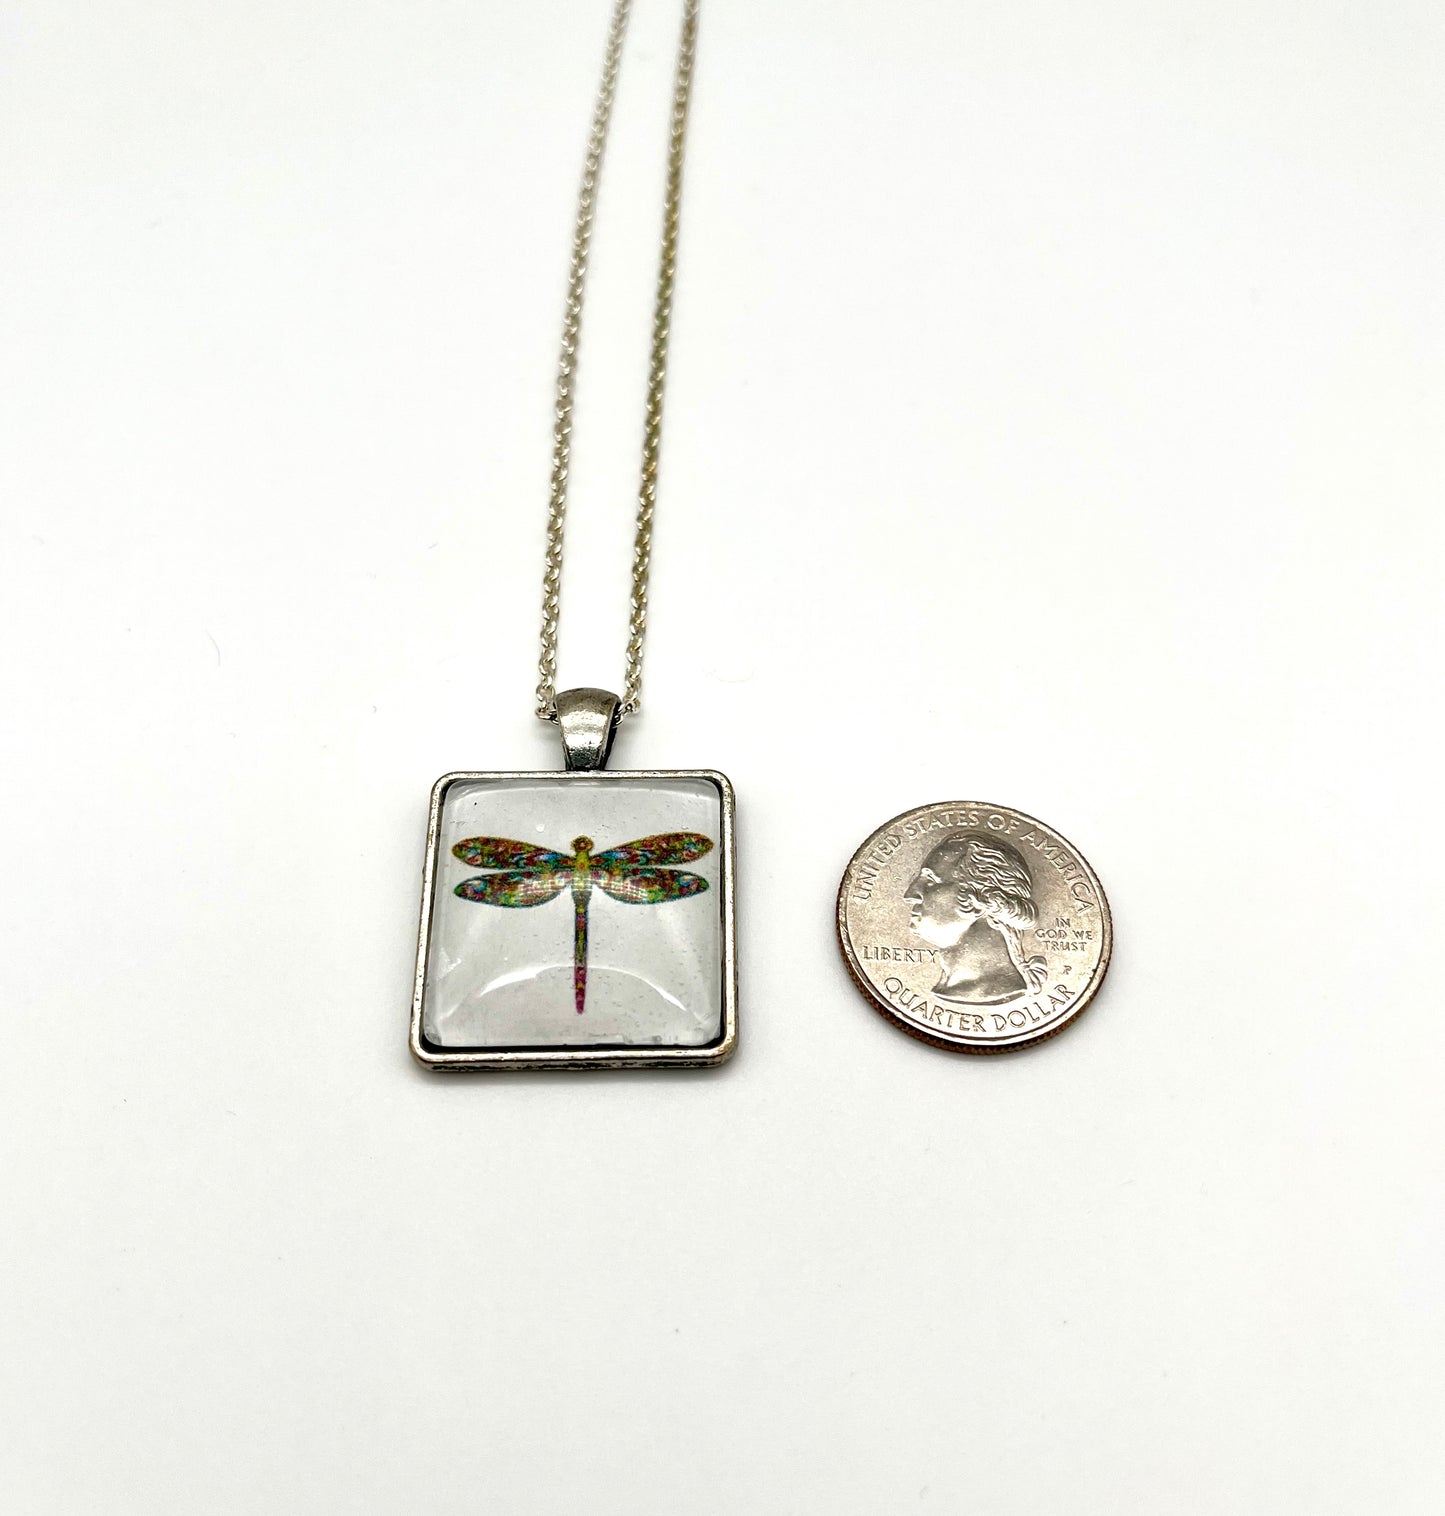 Antique silver dragonfly print square pendant chain necklace-limited edition